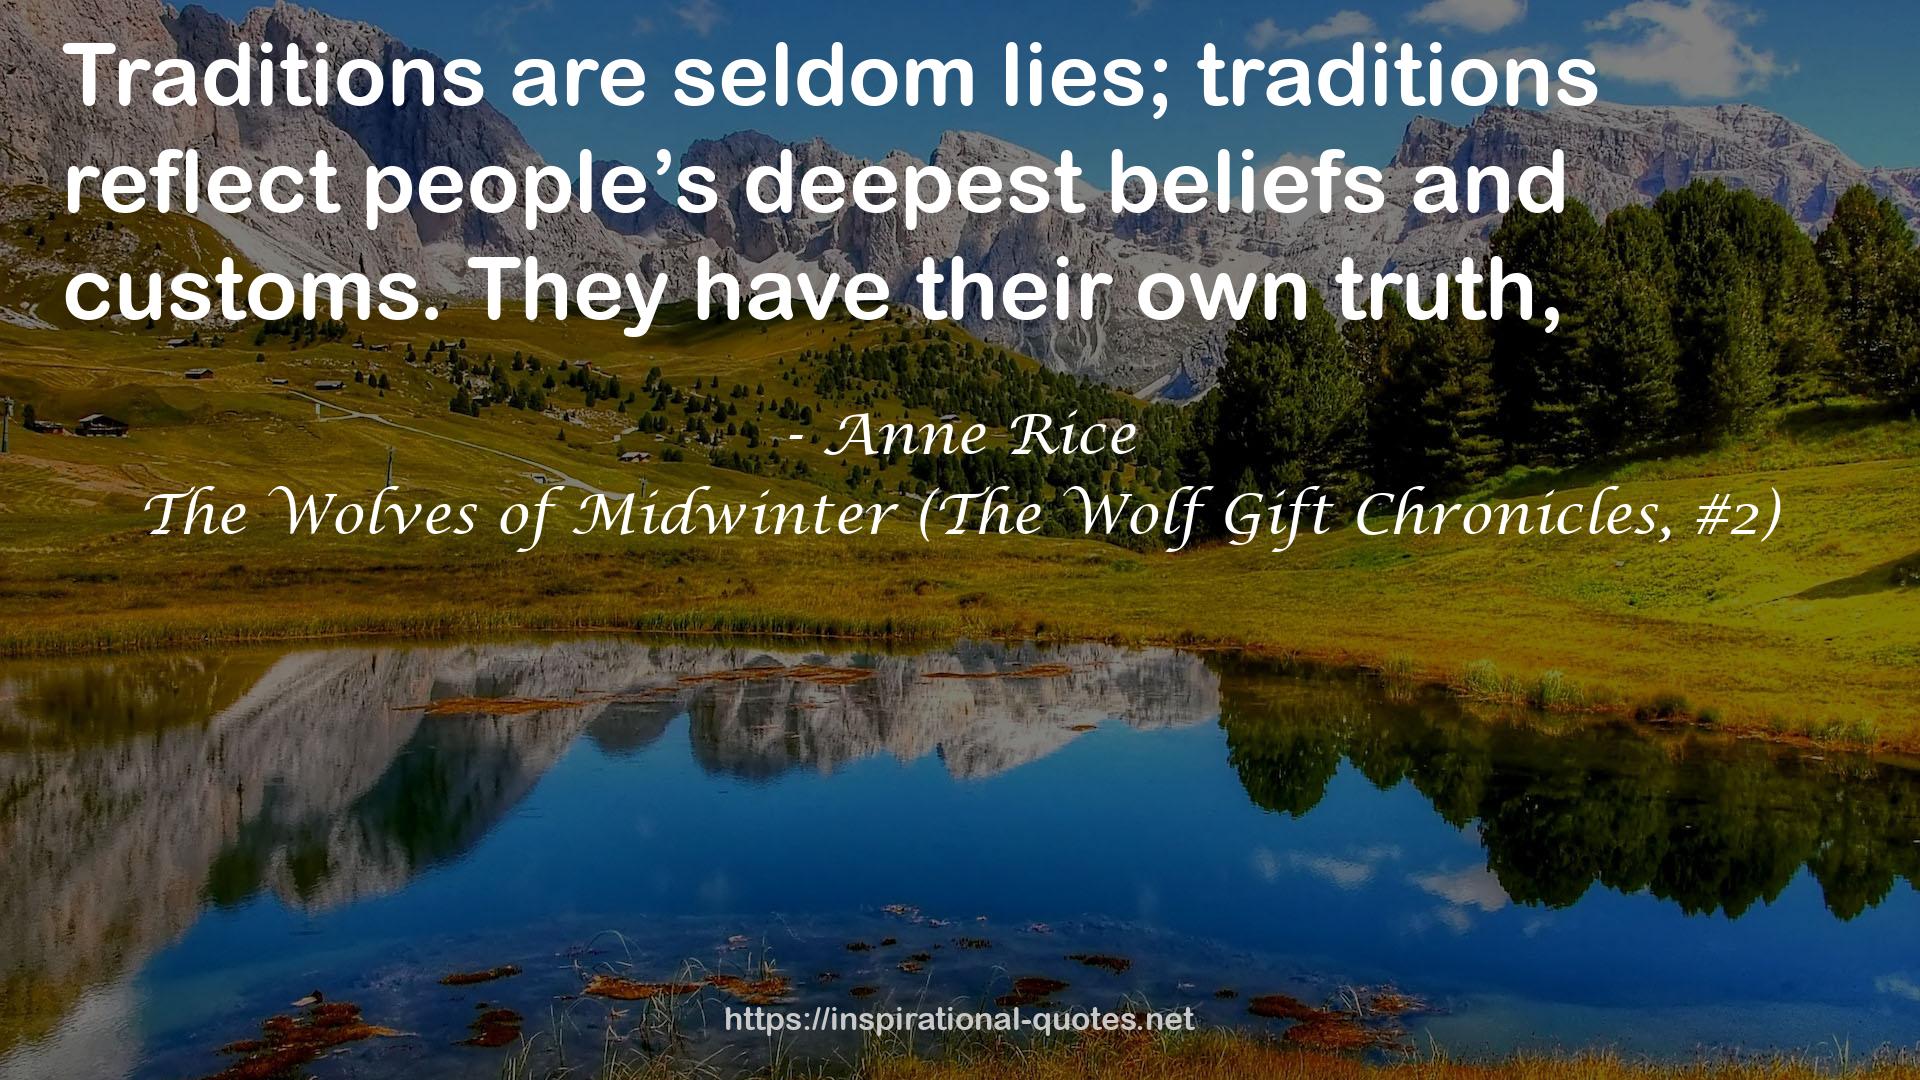 The Wolves of Midwinter (The Wolf Gift Chronicles, #2) QUOTES